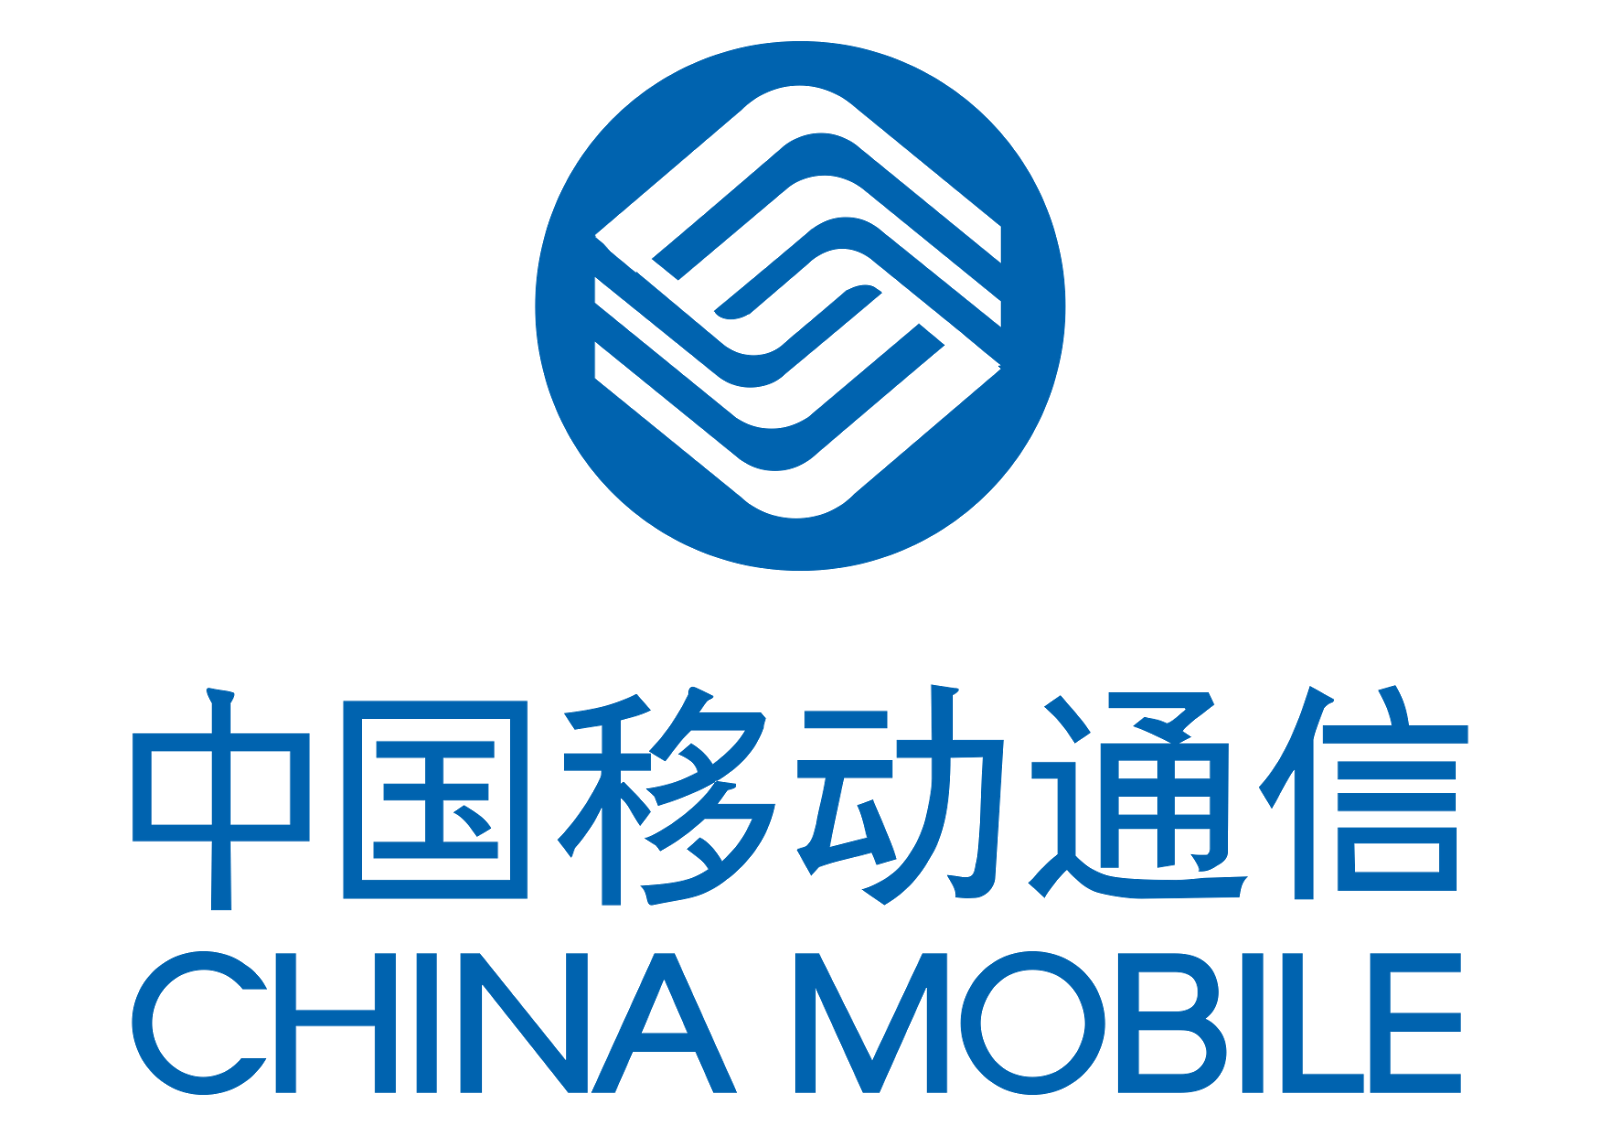 China Mobile Logo Vector - China Mobile Vector, Transparent background PNG HD thumbnail